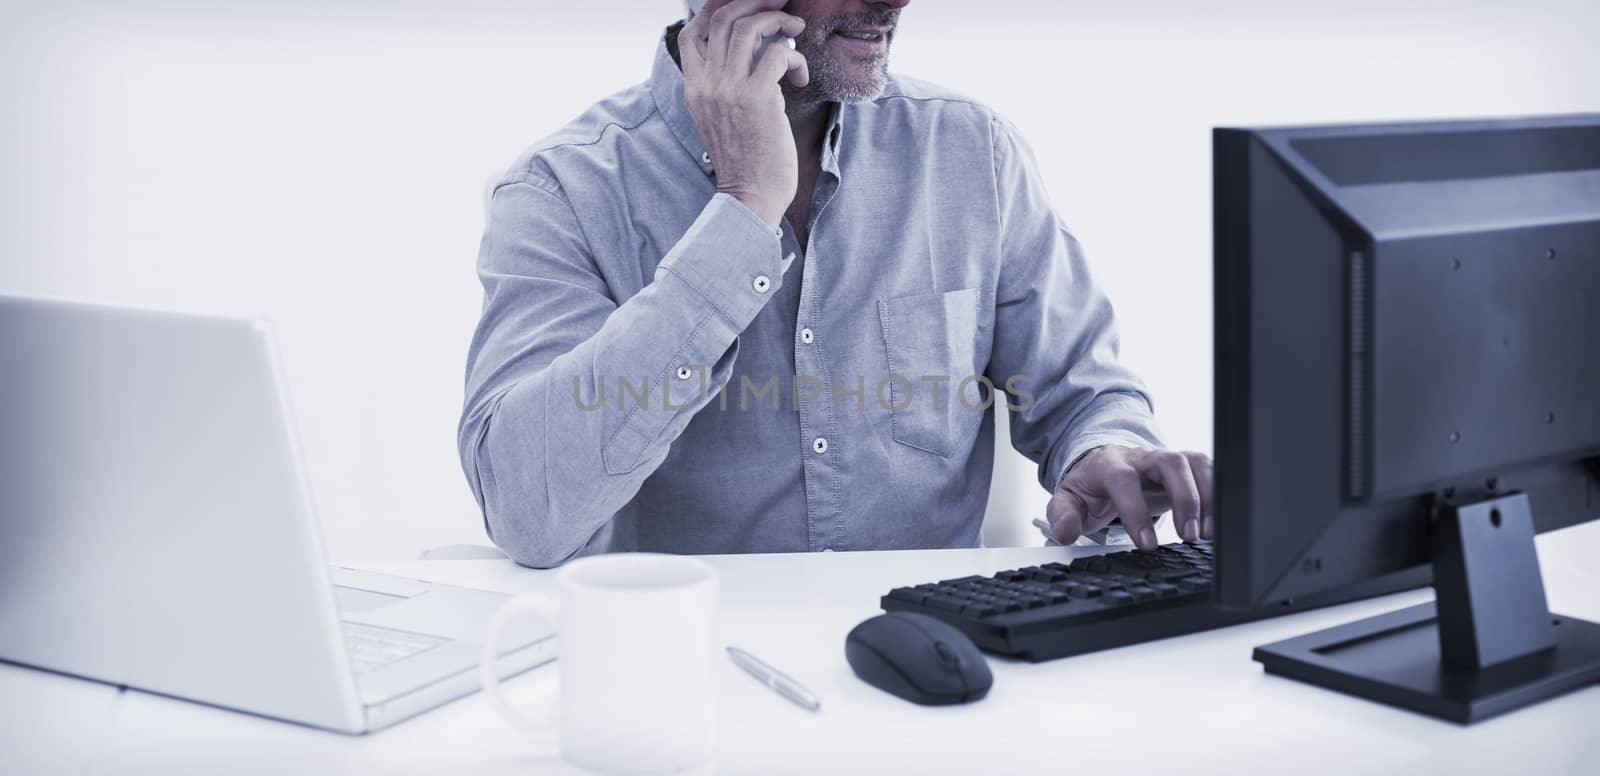 Businessman with cellphone, laptop and computer at desk by Wavebreakmedia